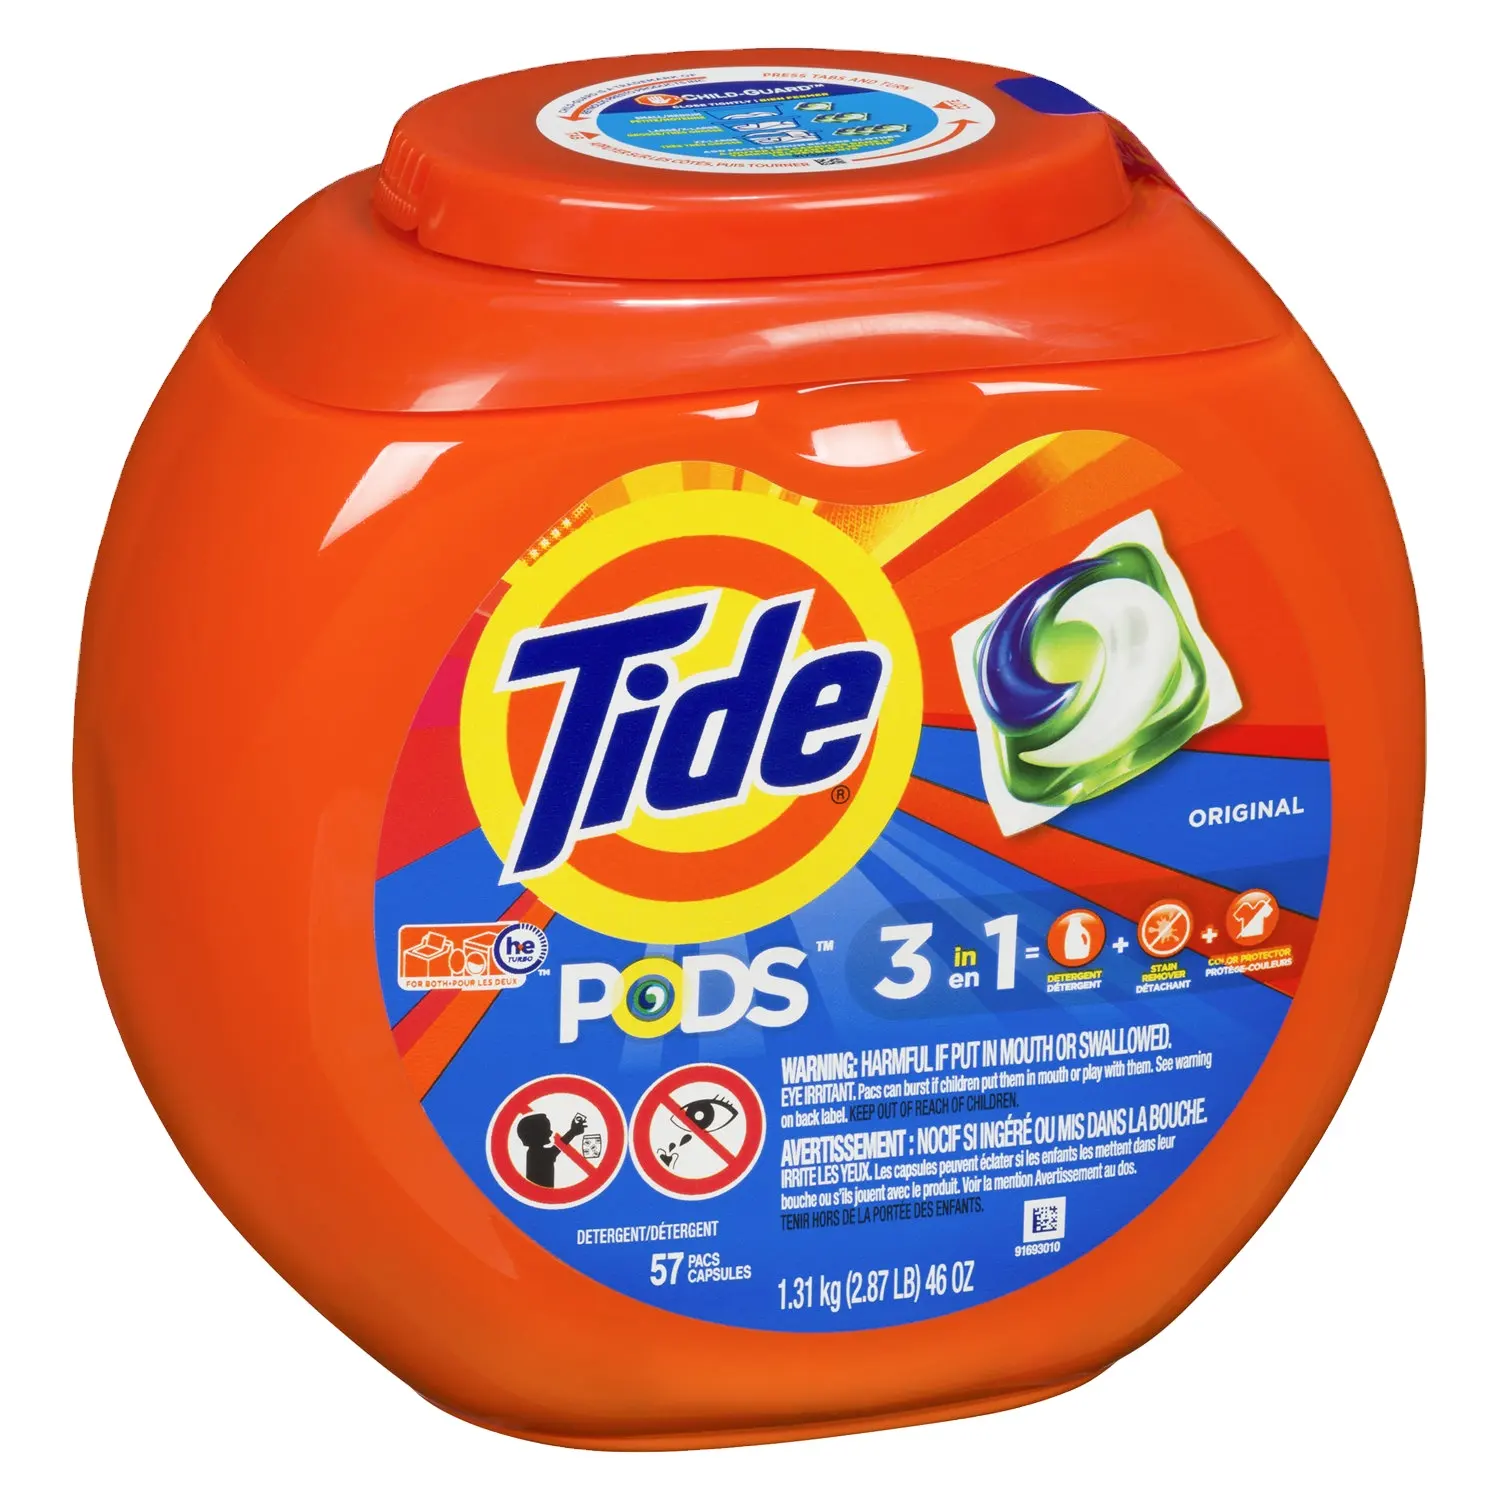 Quality Laundry Detergent Washing Powder / TIDE Cleaning Detergents PODS